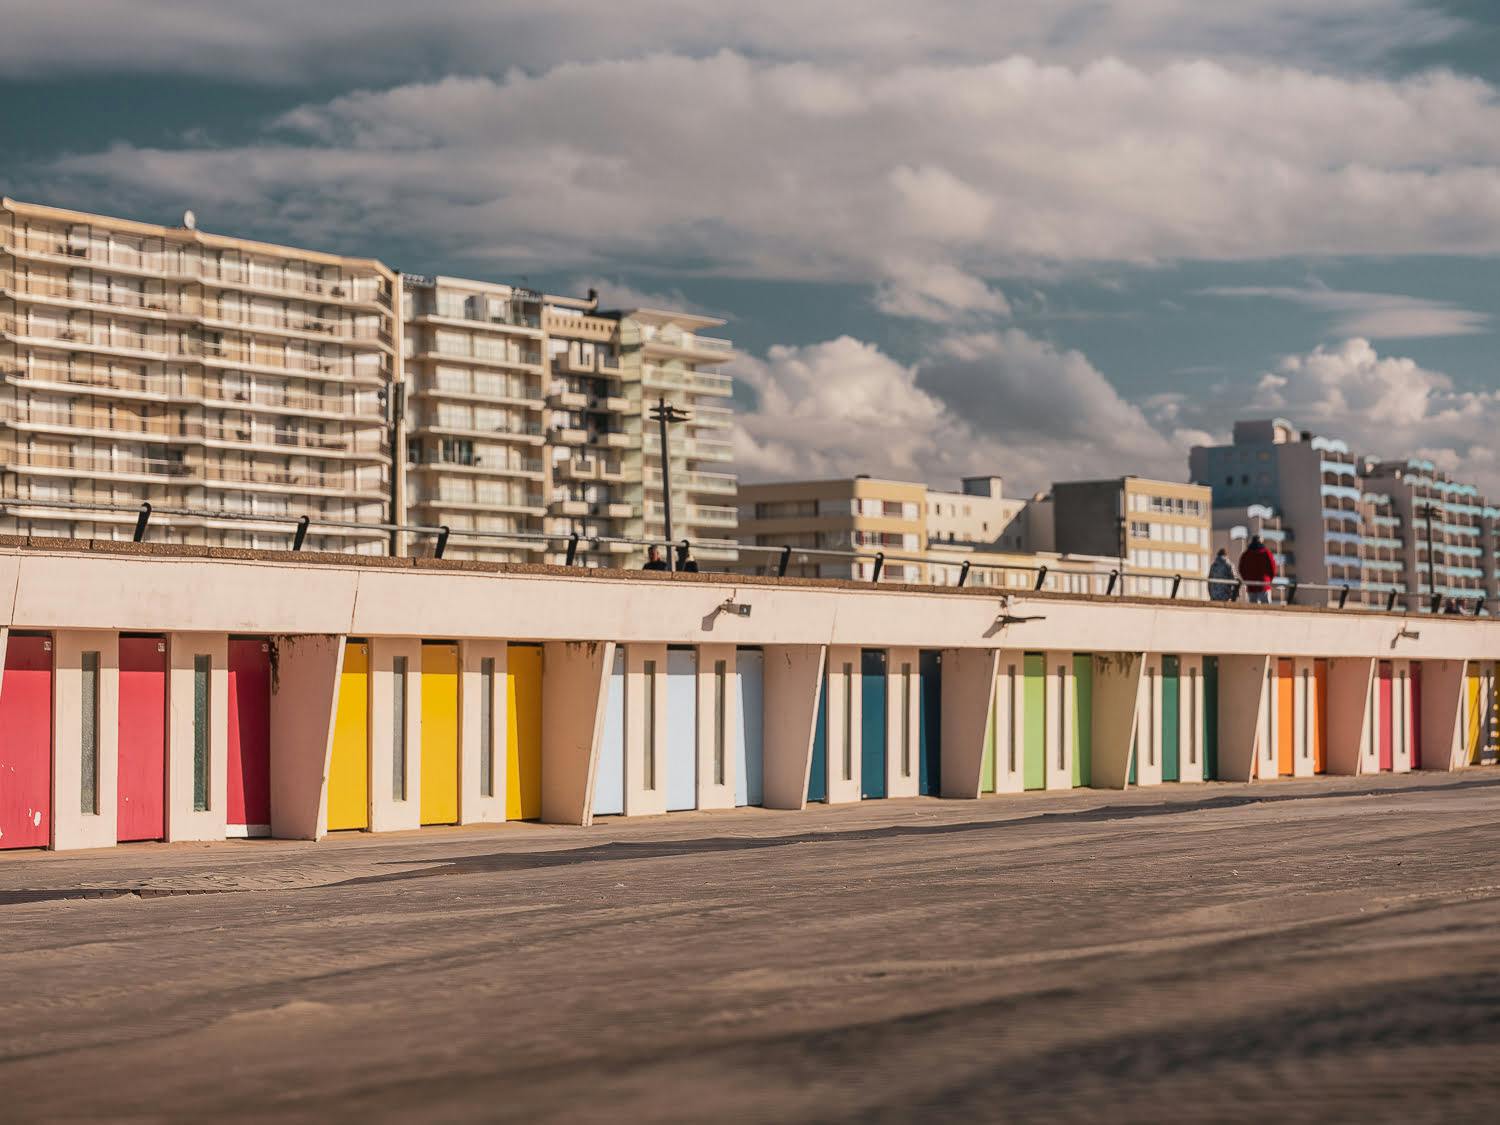 The beach cabins of Le Touquet, all in vibrant colors!